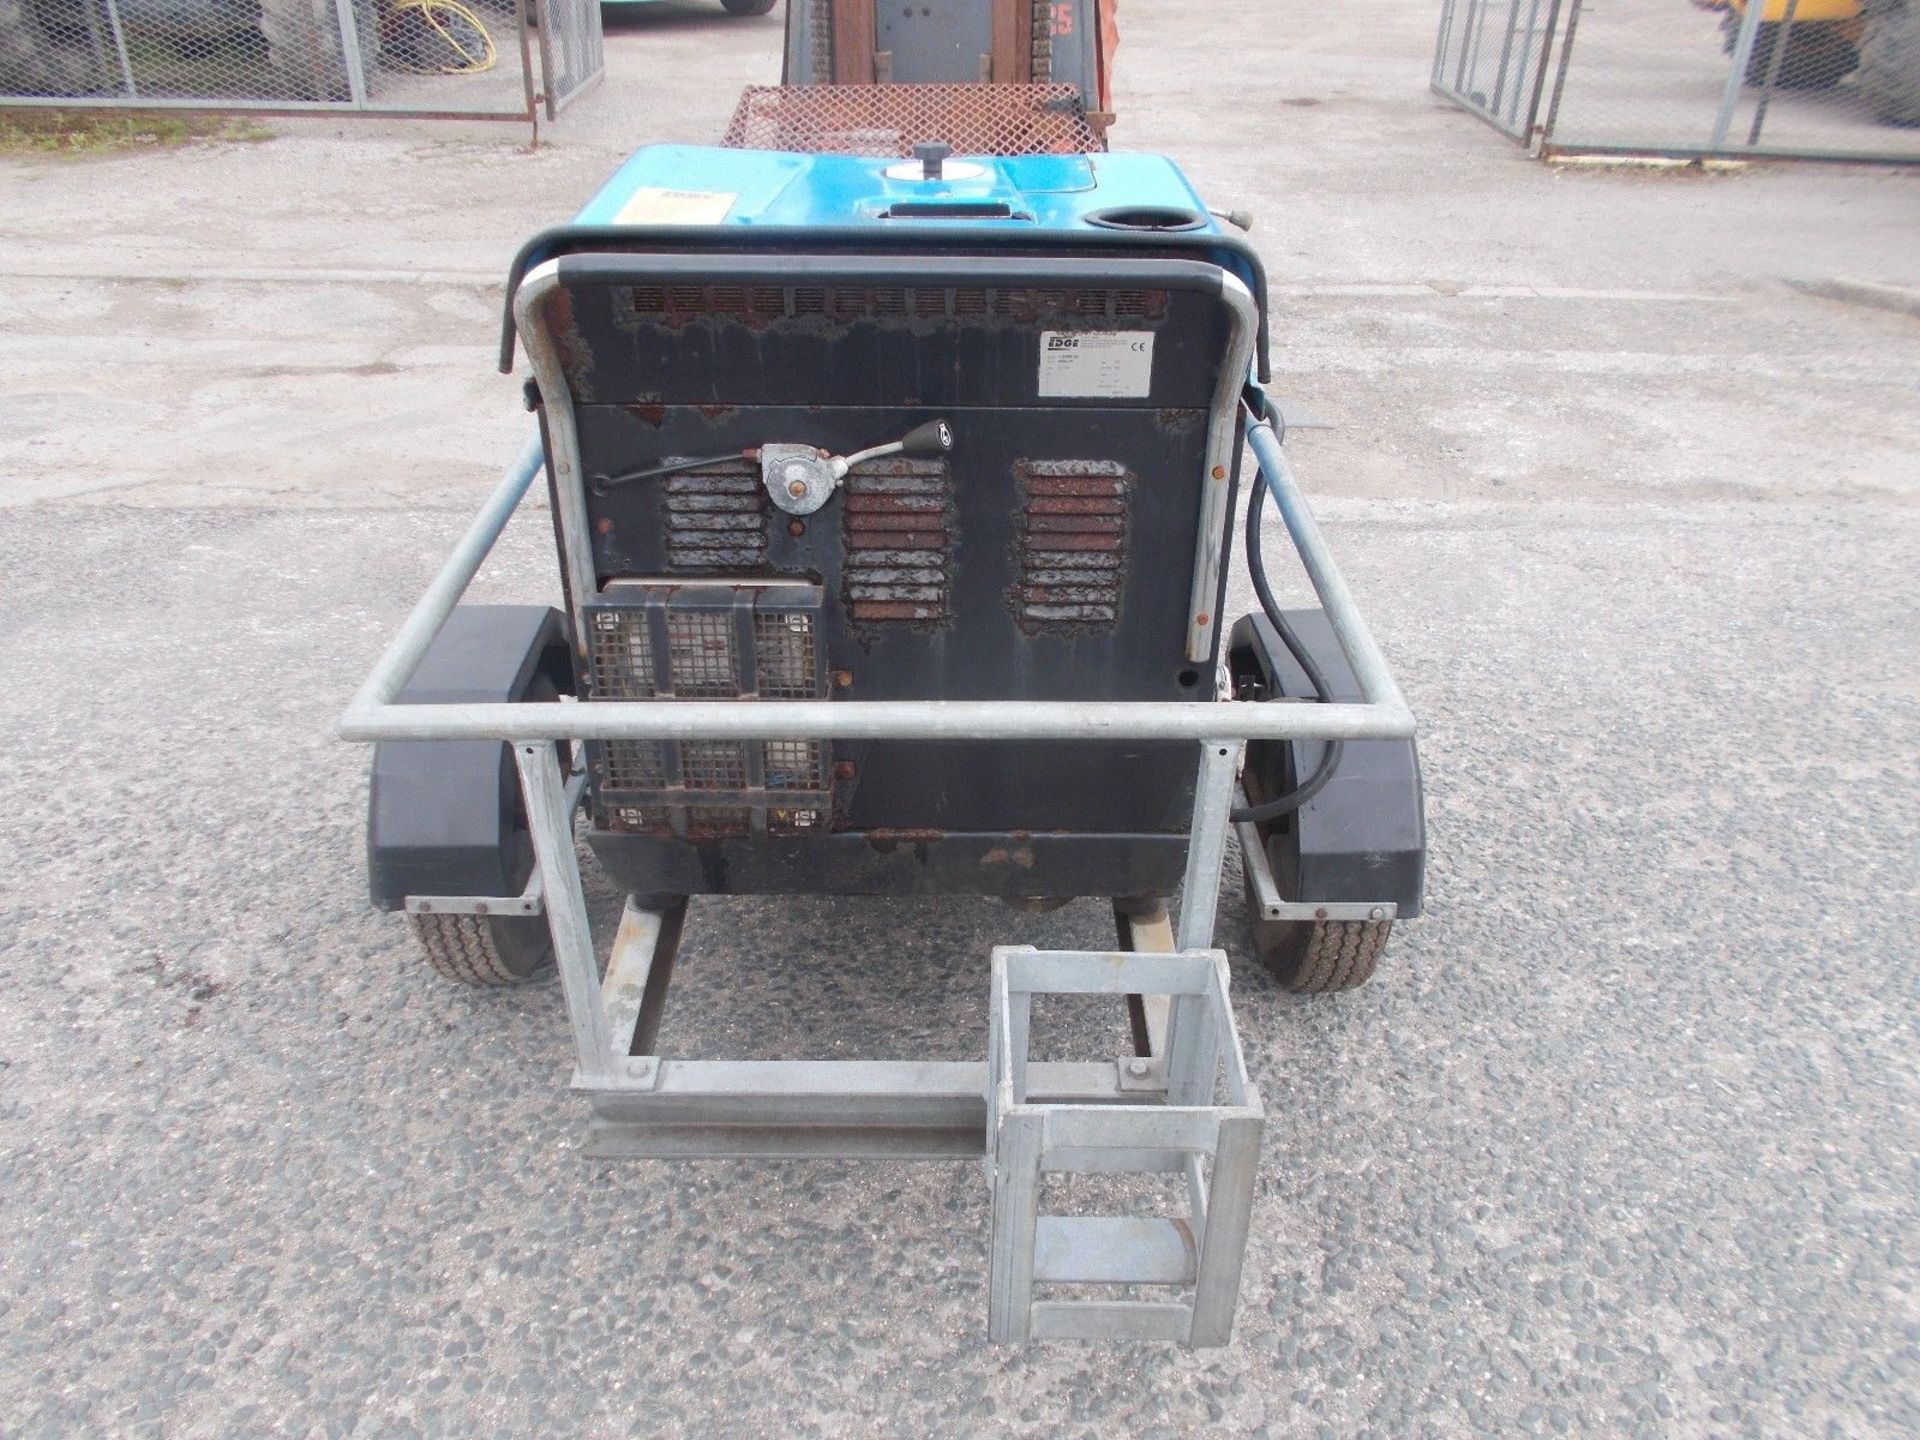 Edge V 200 MD Towable Hot and Cold Diesel Engined Pressure Washer - Image 2 of 7